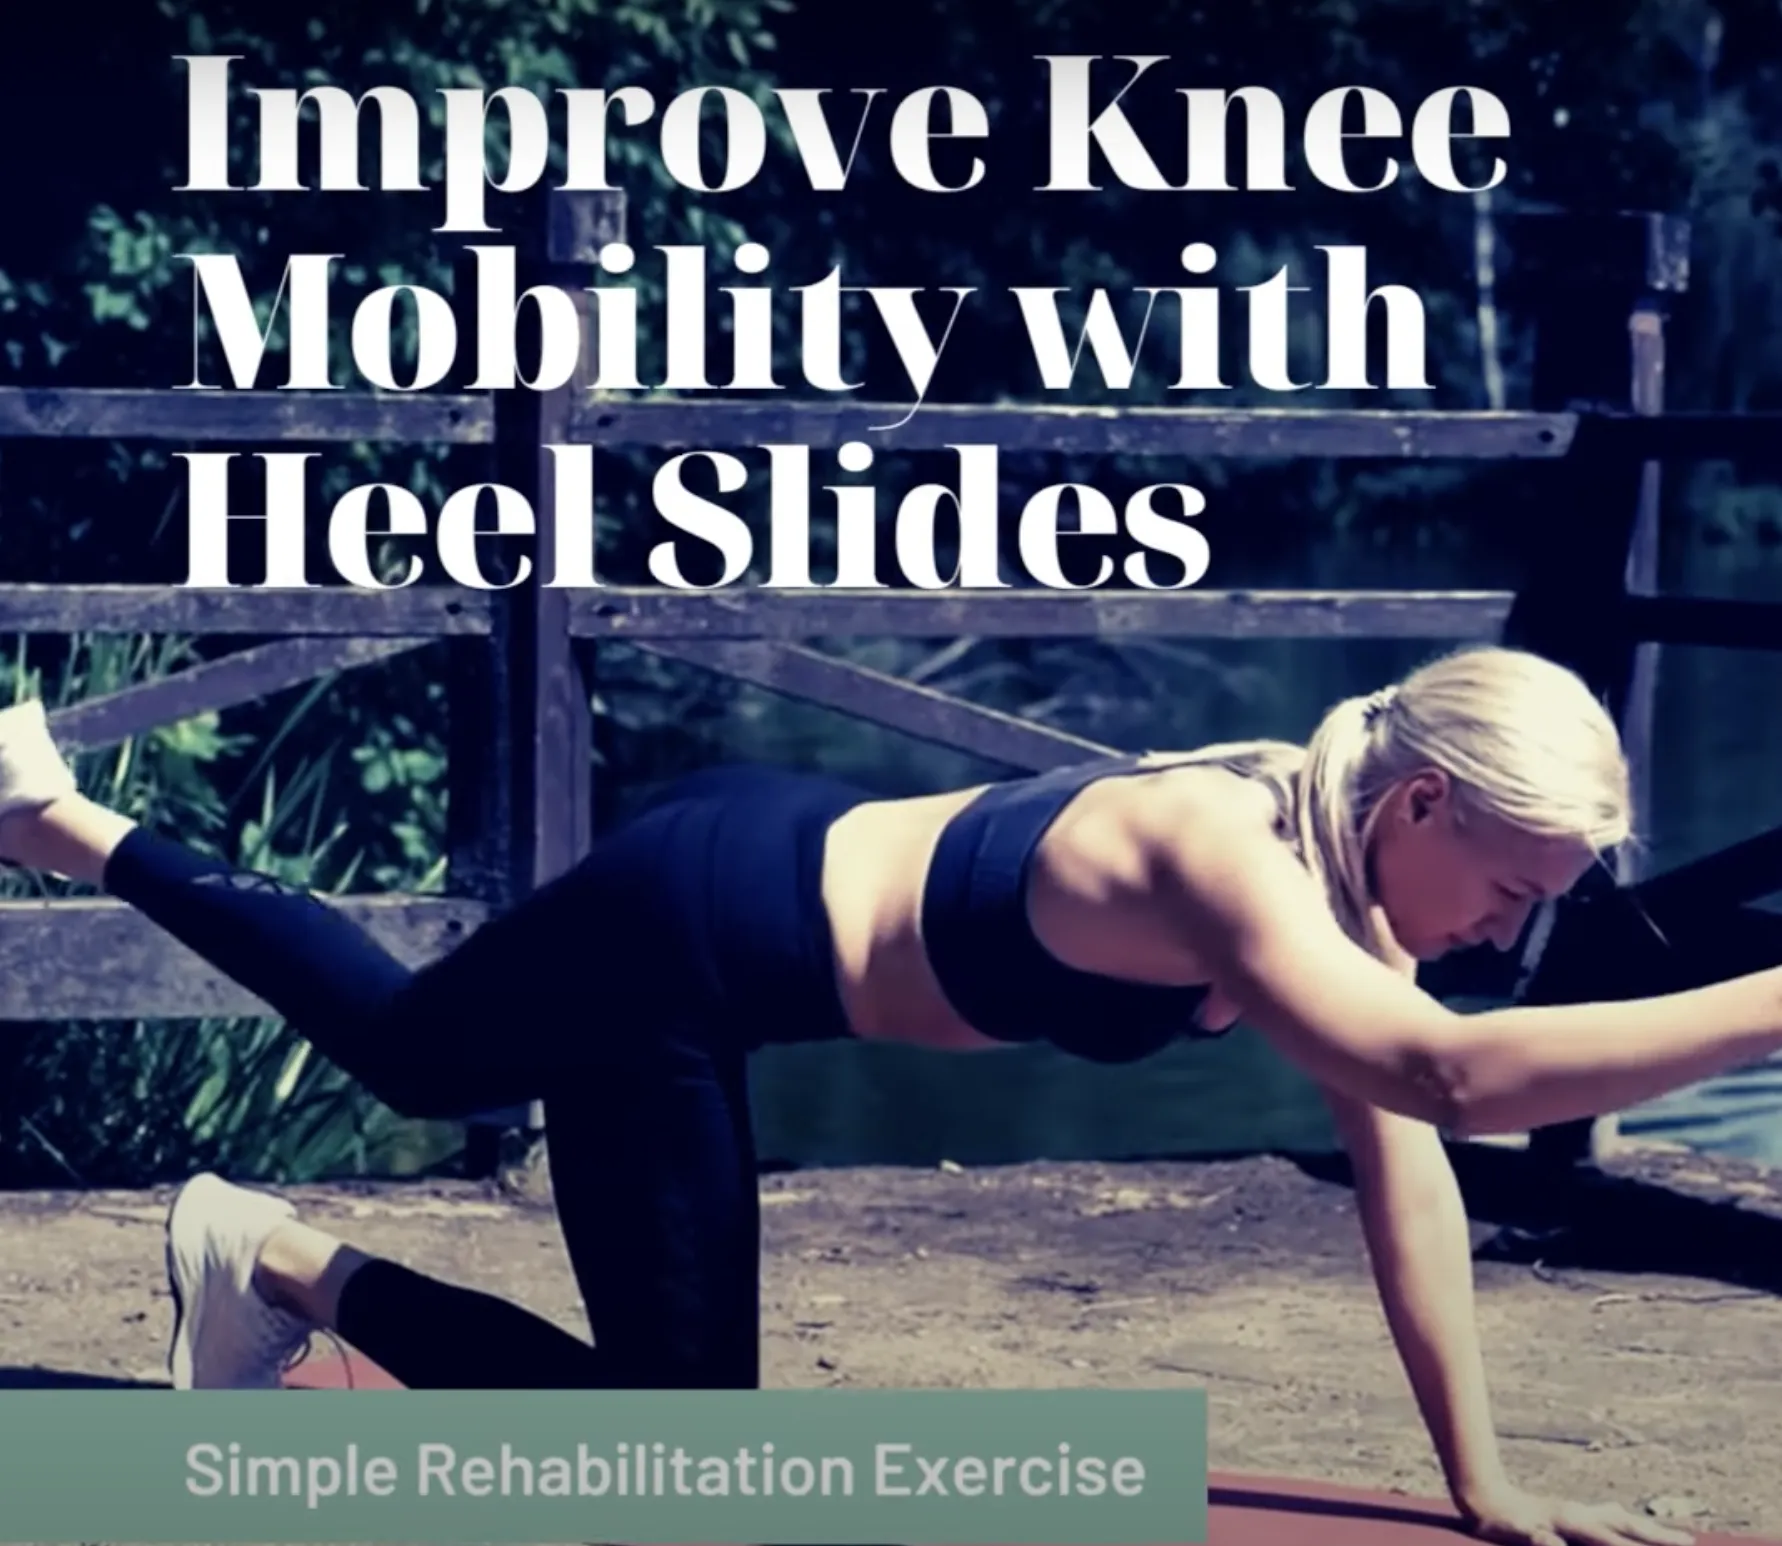 Improve knee mobility with heel slides